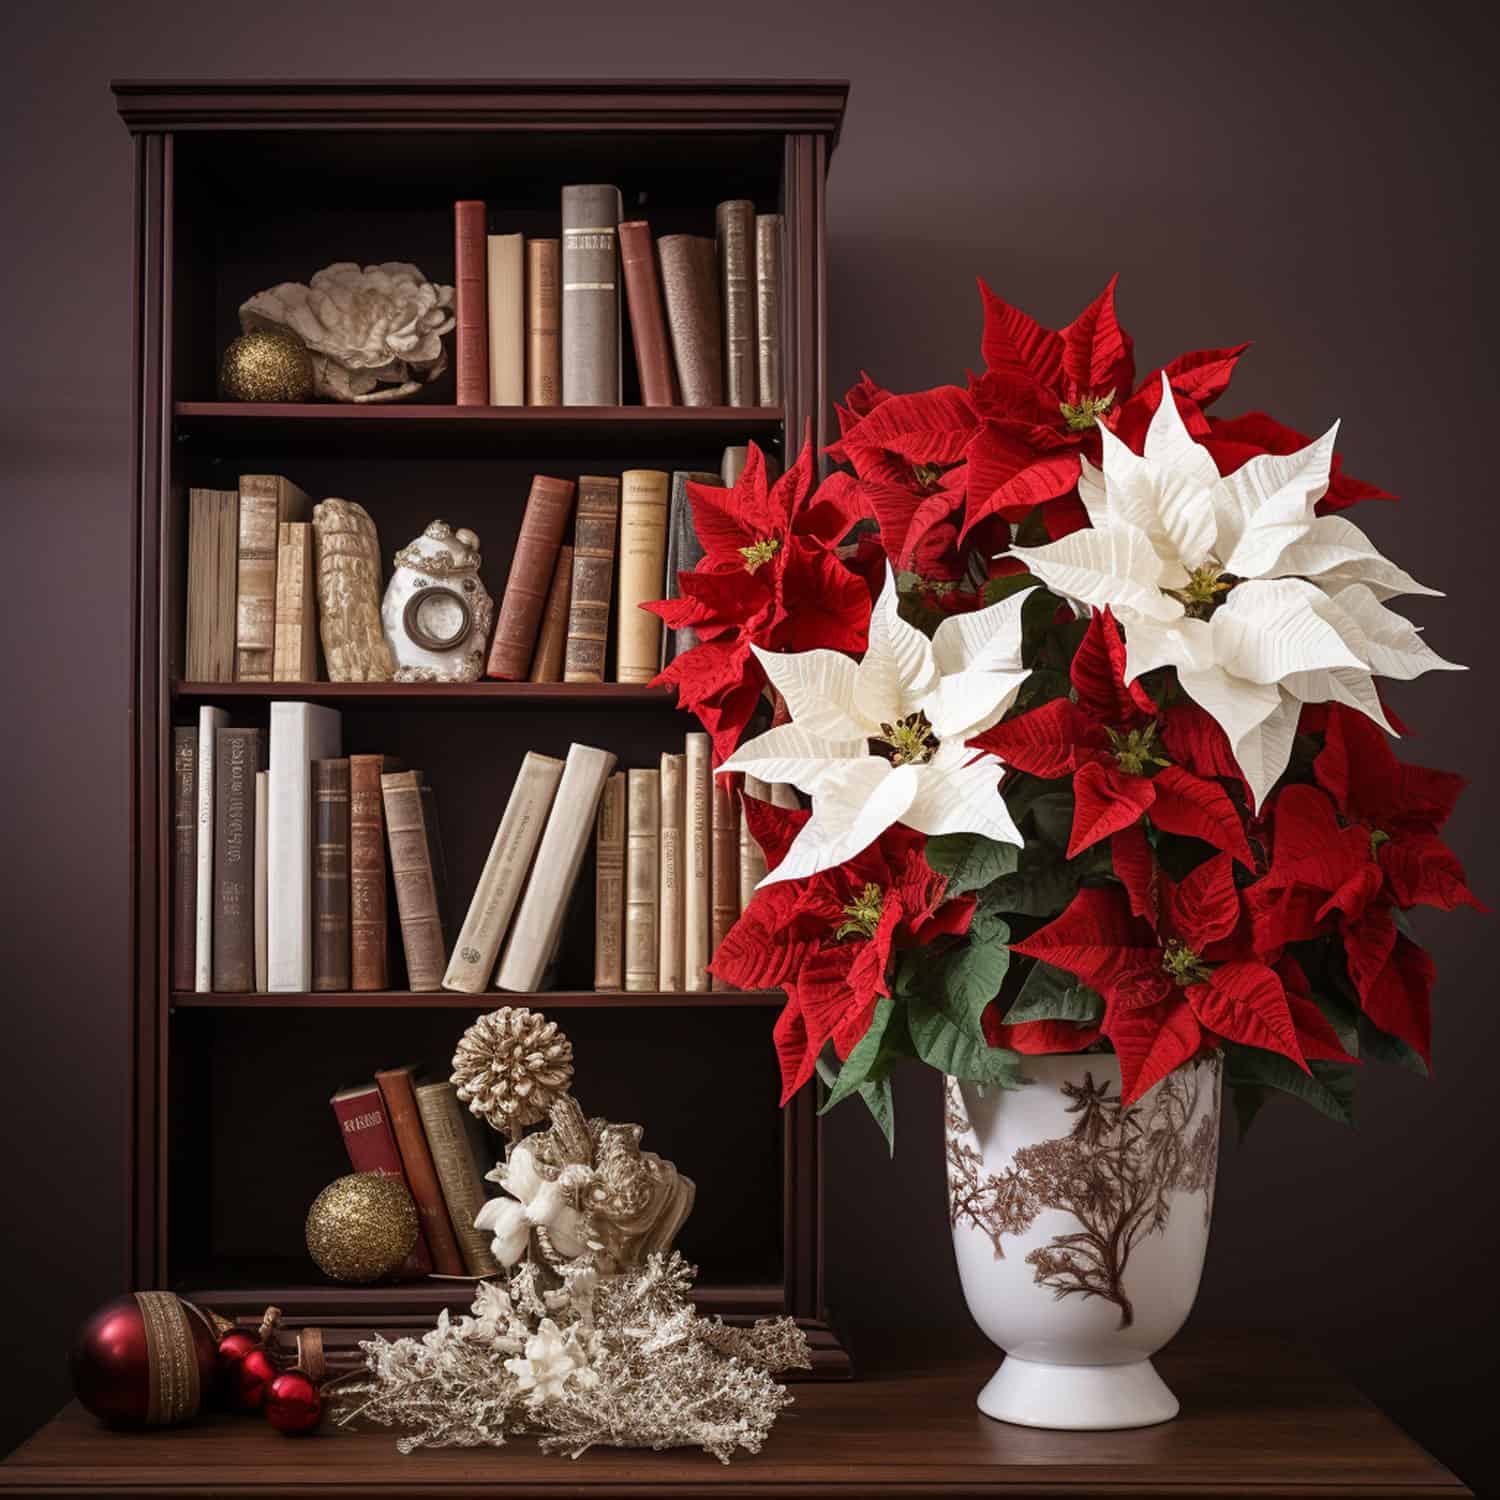 A vase full of white and red Poinsettias 